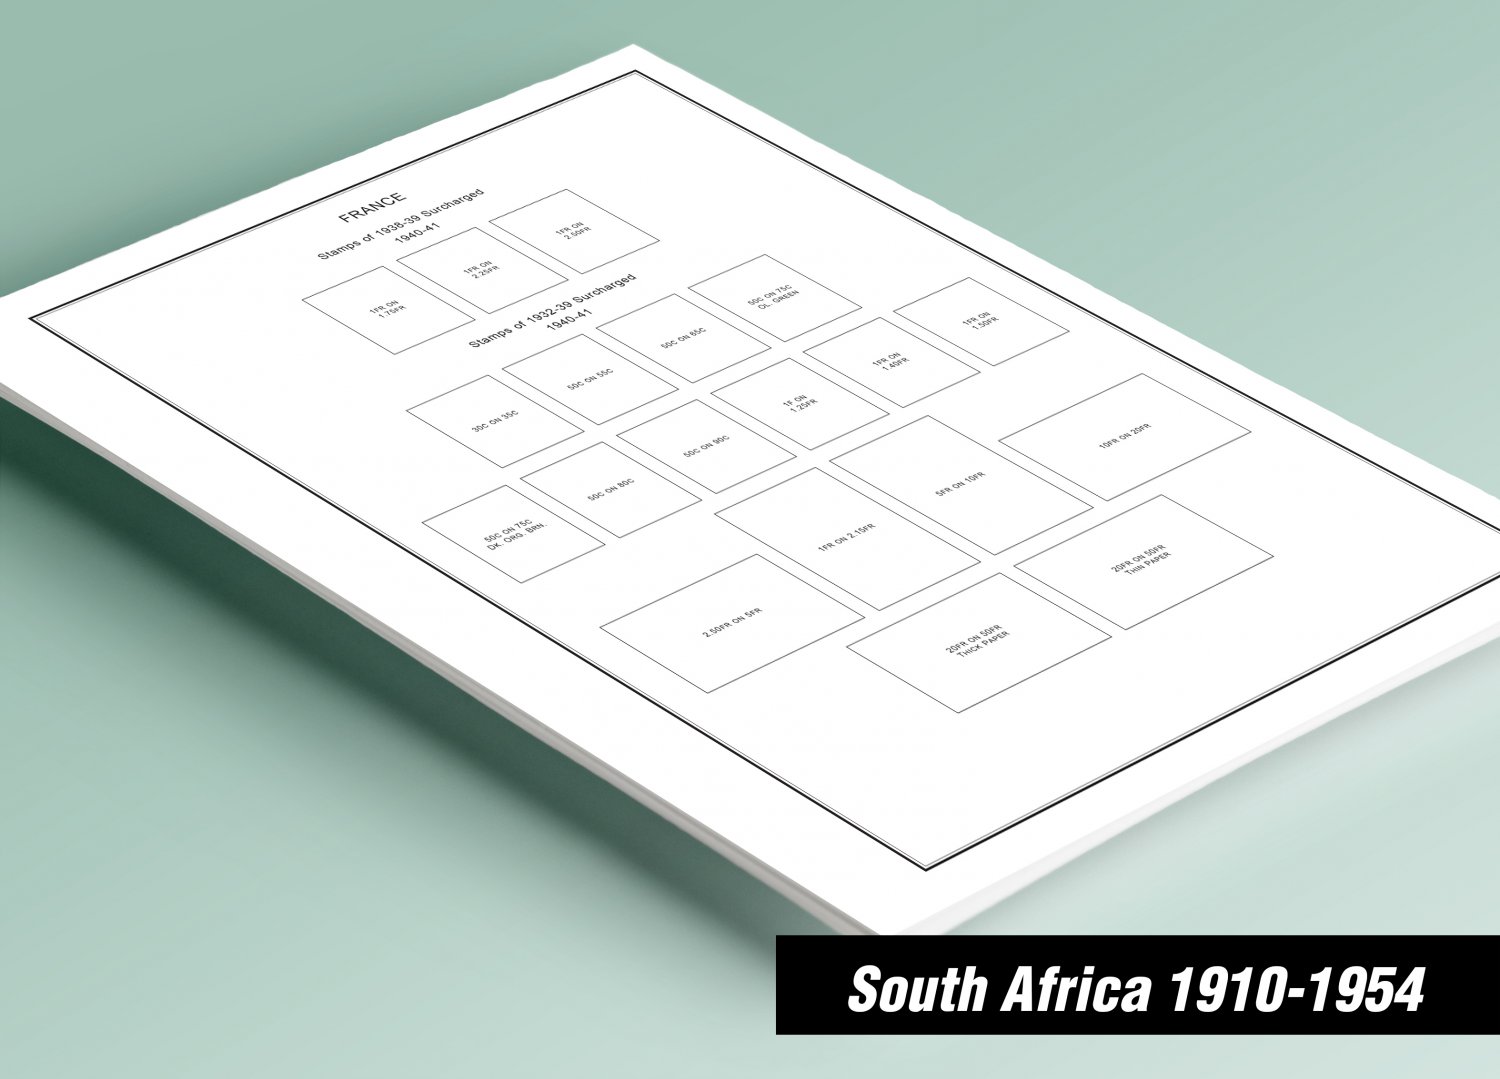 PRINTED SOUTH AFRICA [CLASS.] 1910-1954 STAMP ALBUM PAGES (23 pages)